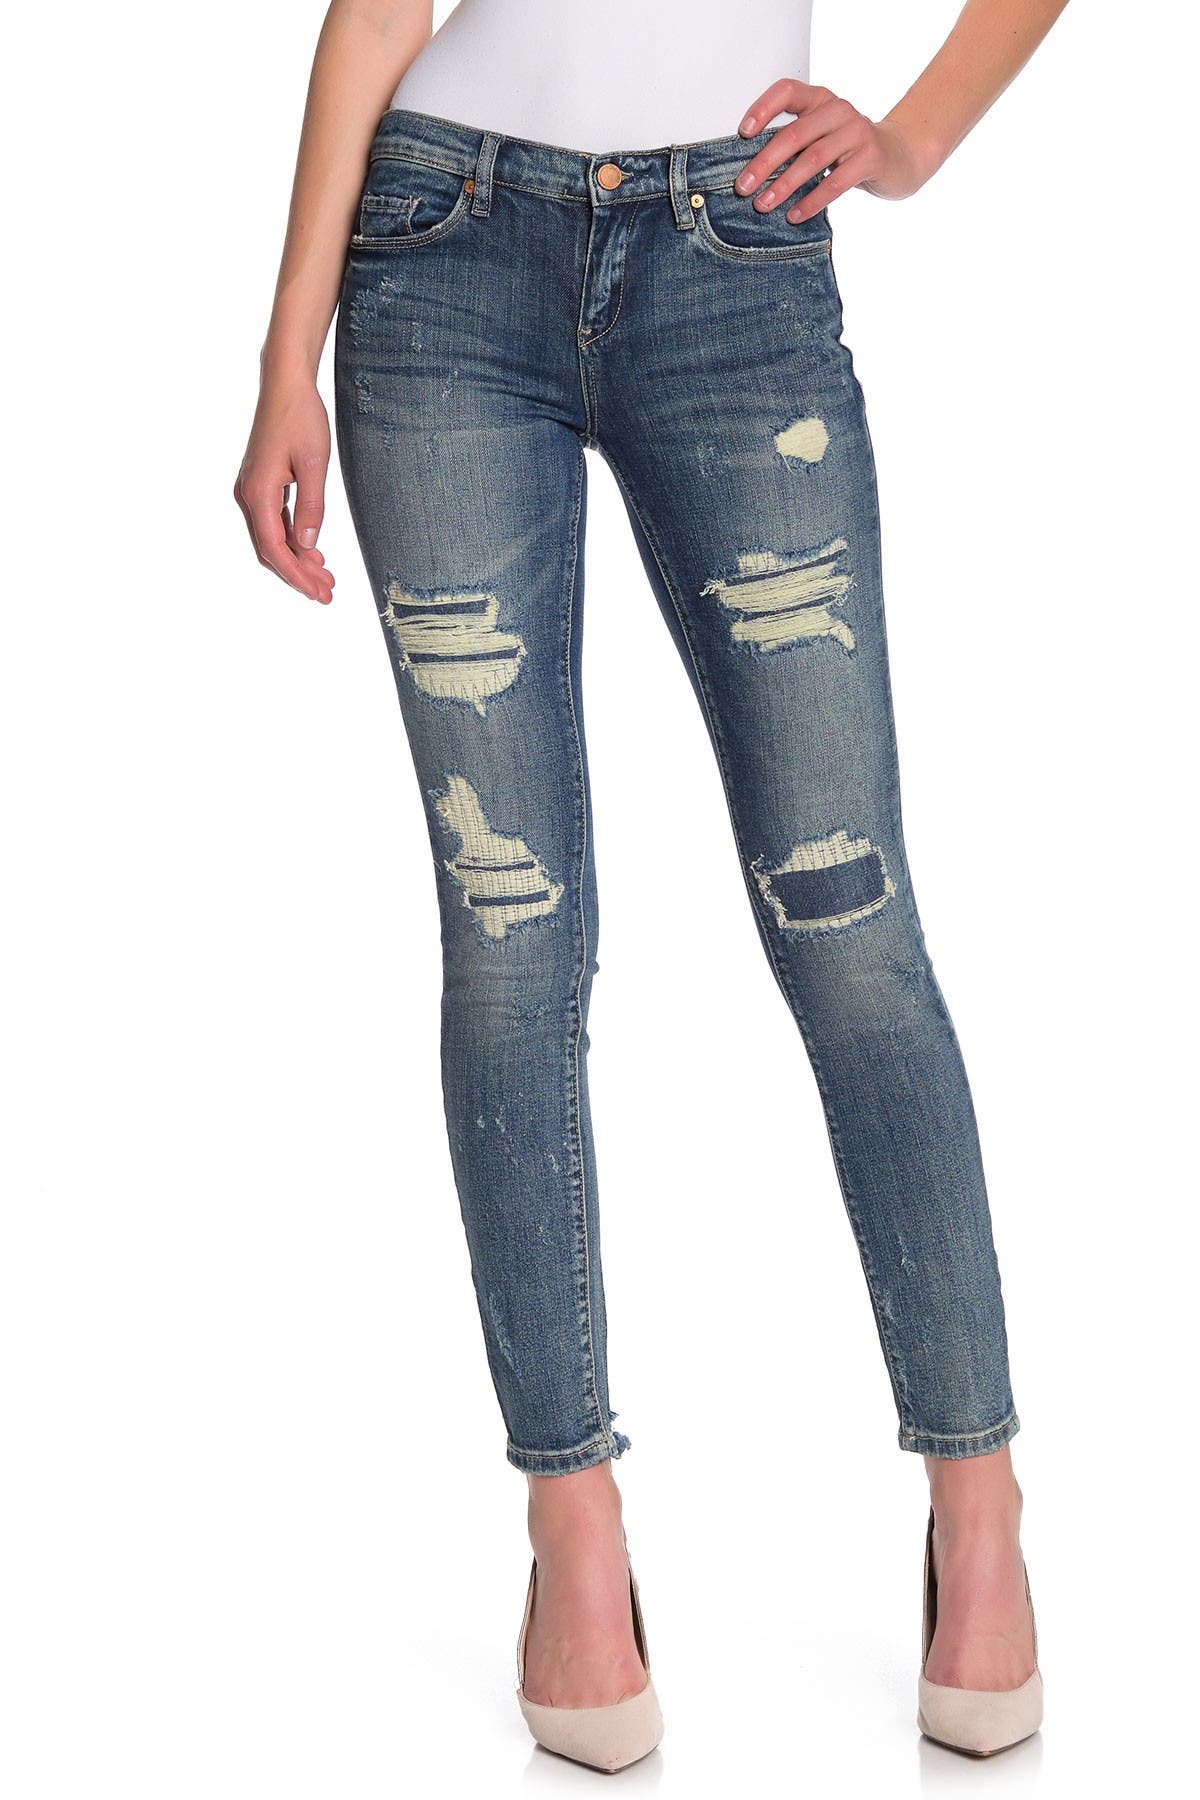 blank nyc mid rise skinny jeans